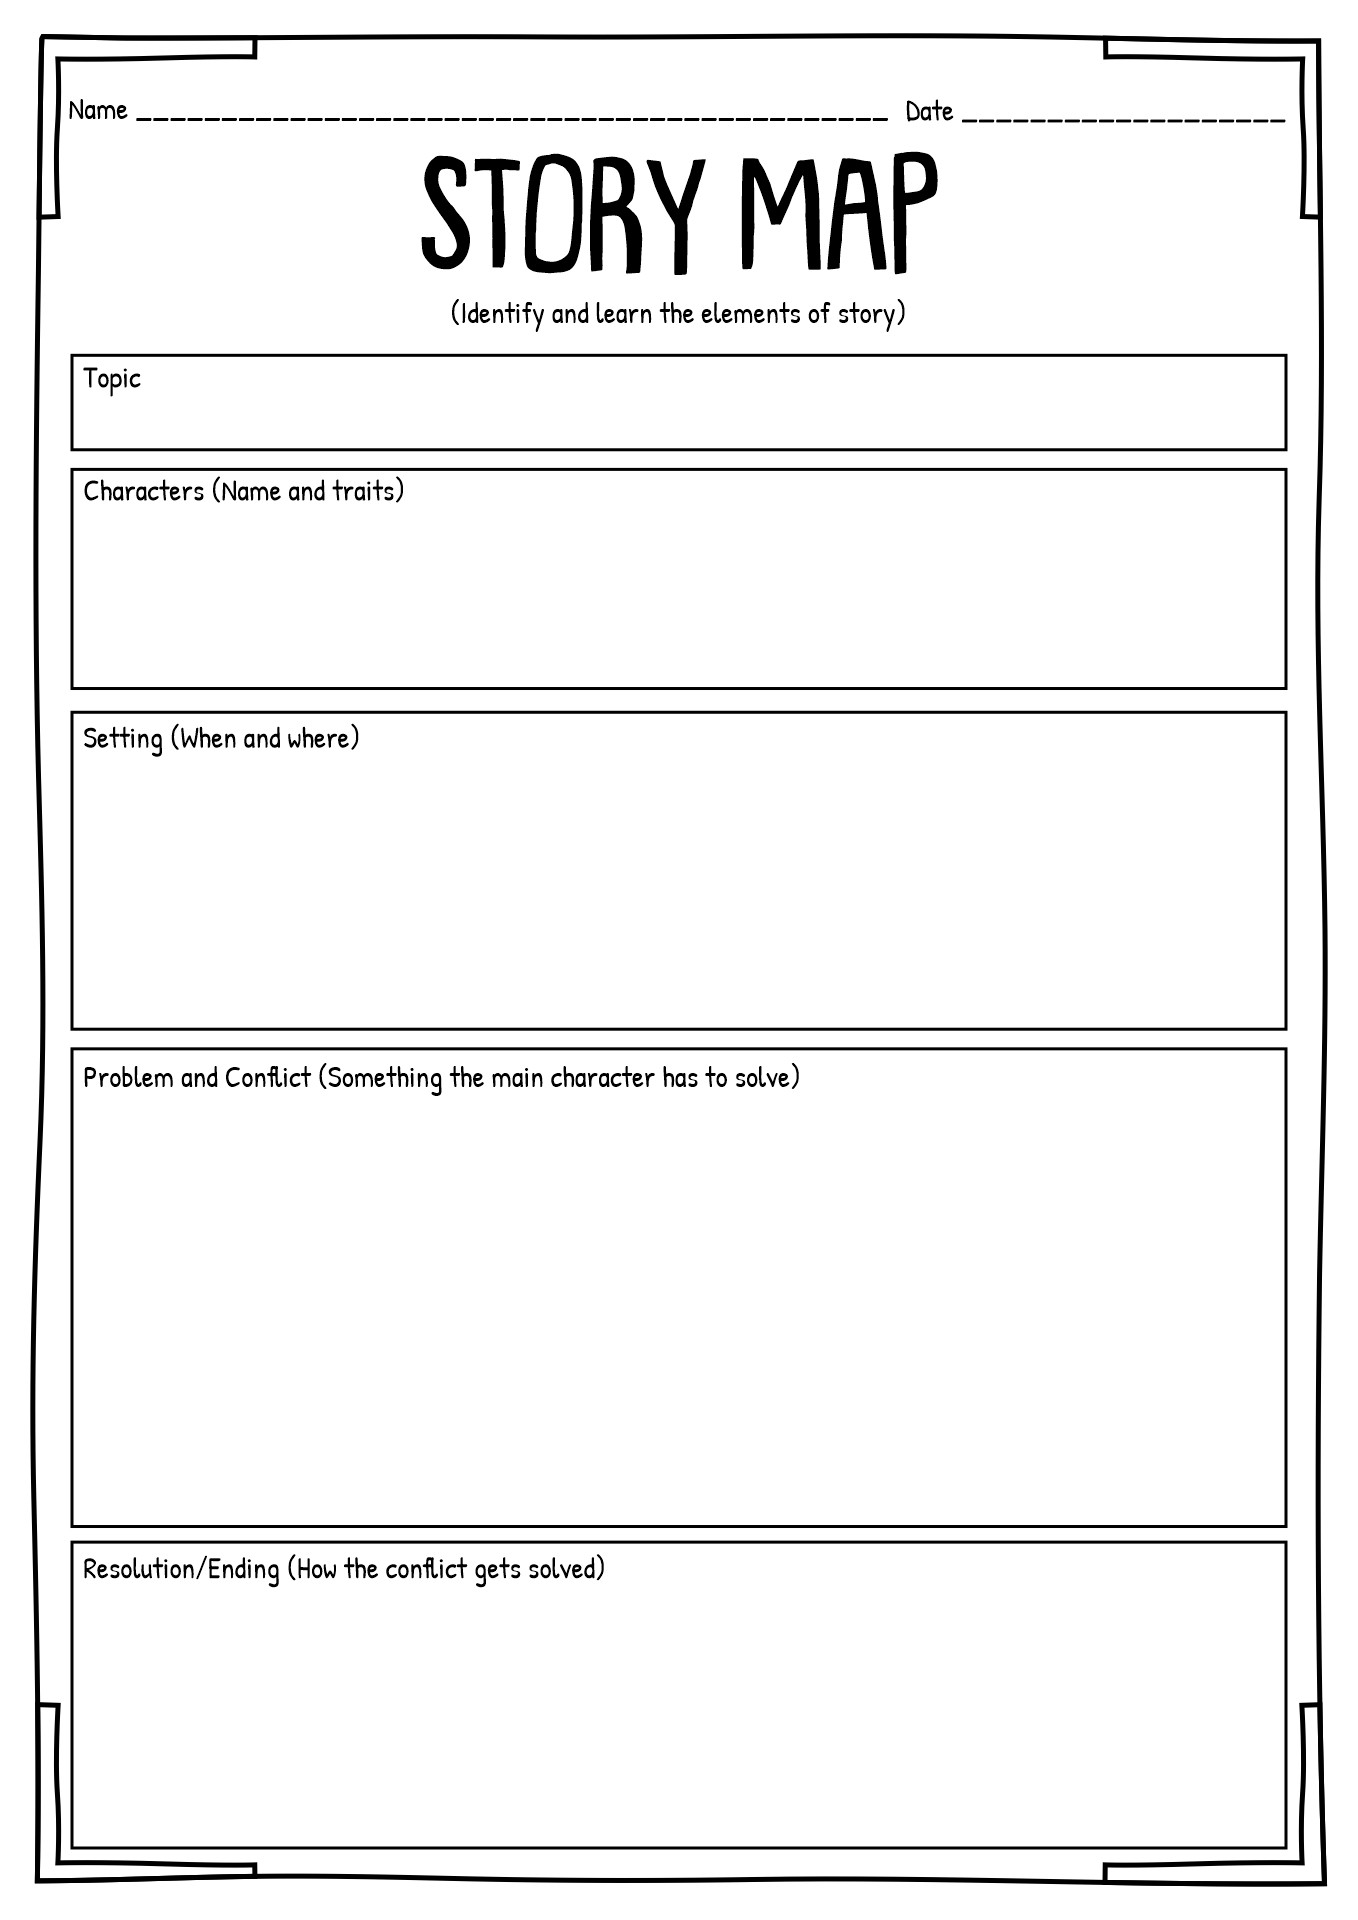 17-best-images-of-story-sequence-of-events-worksheets-story